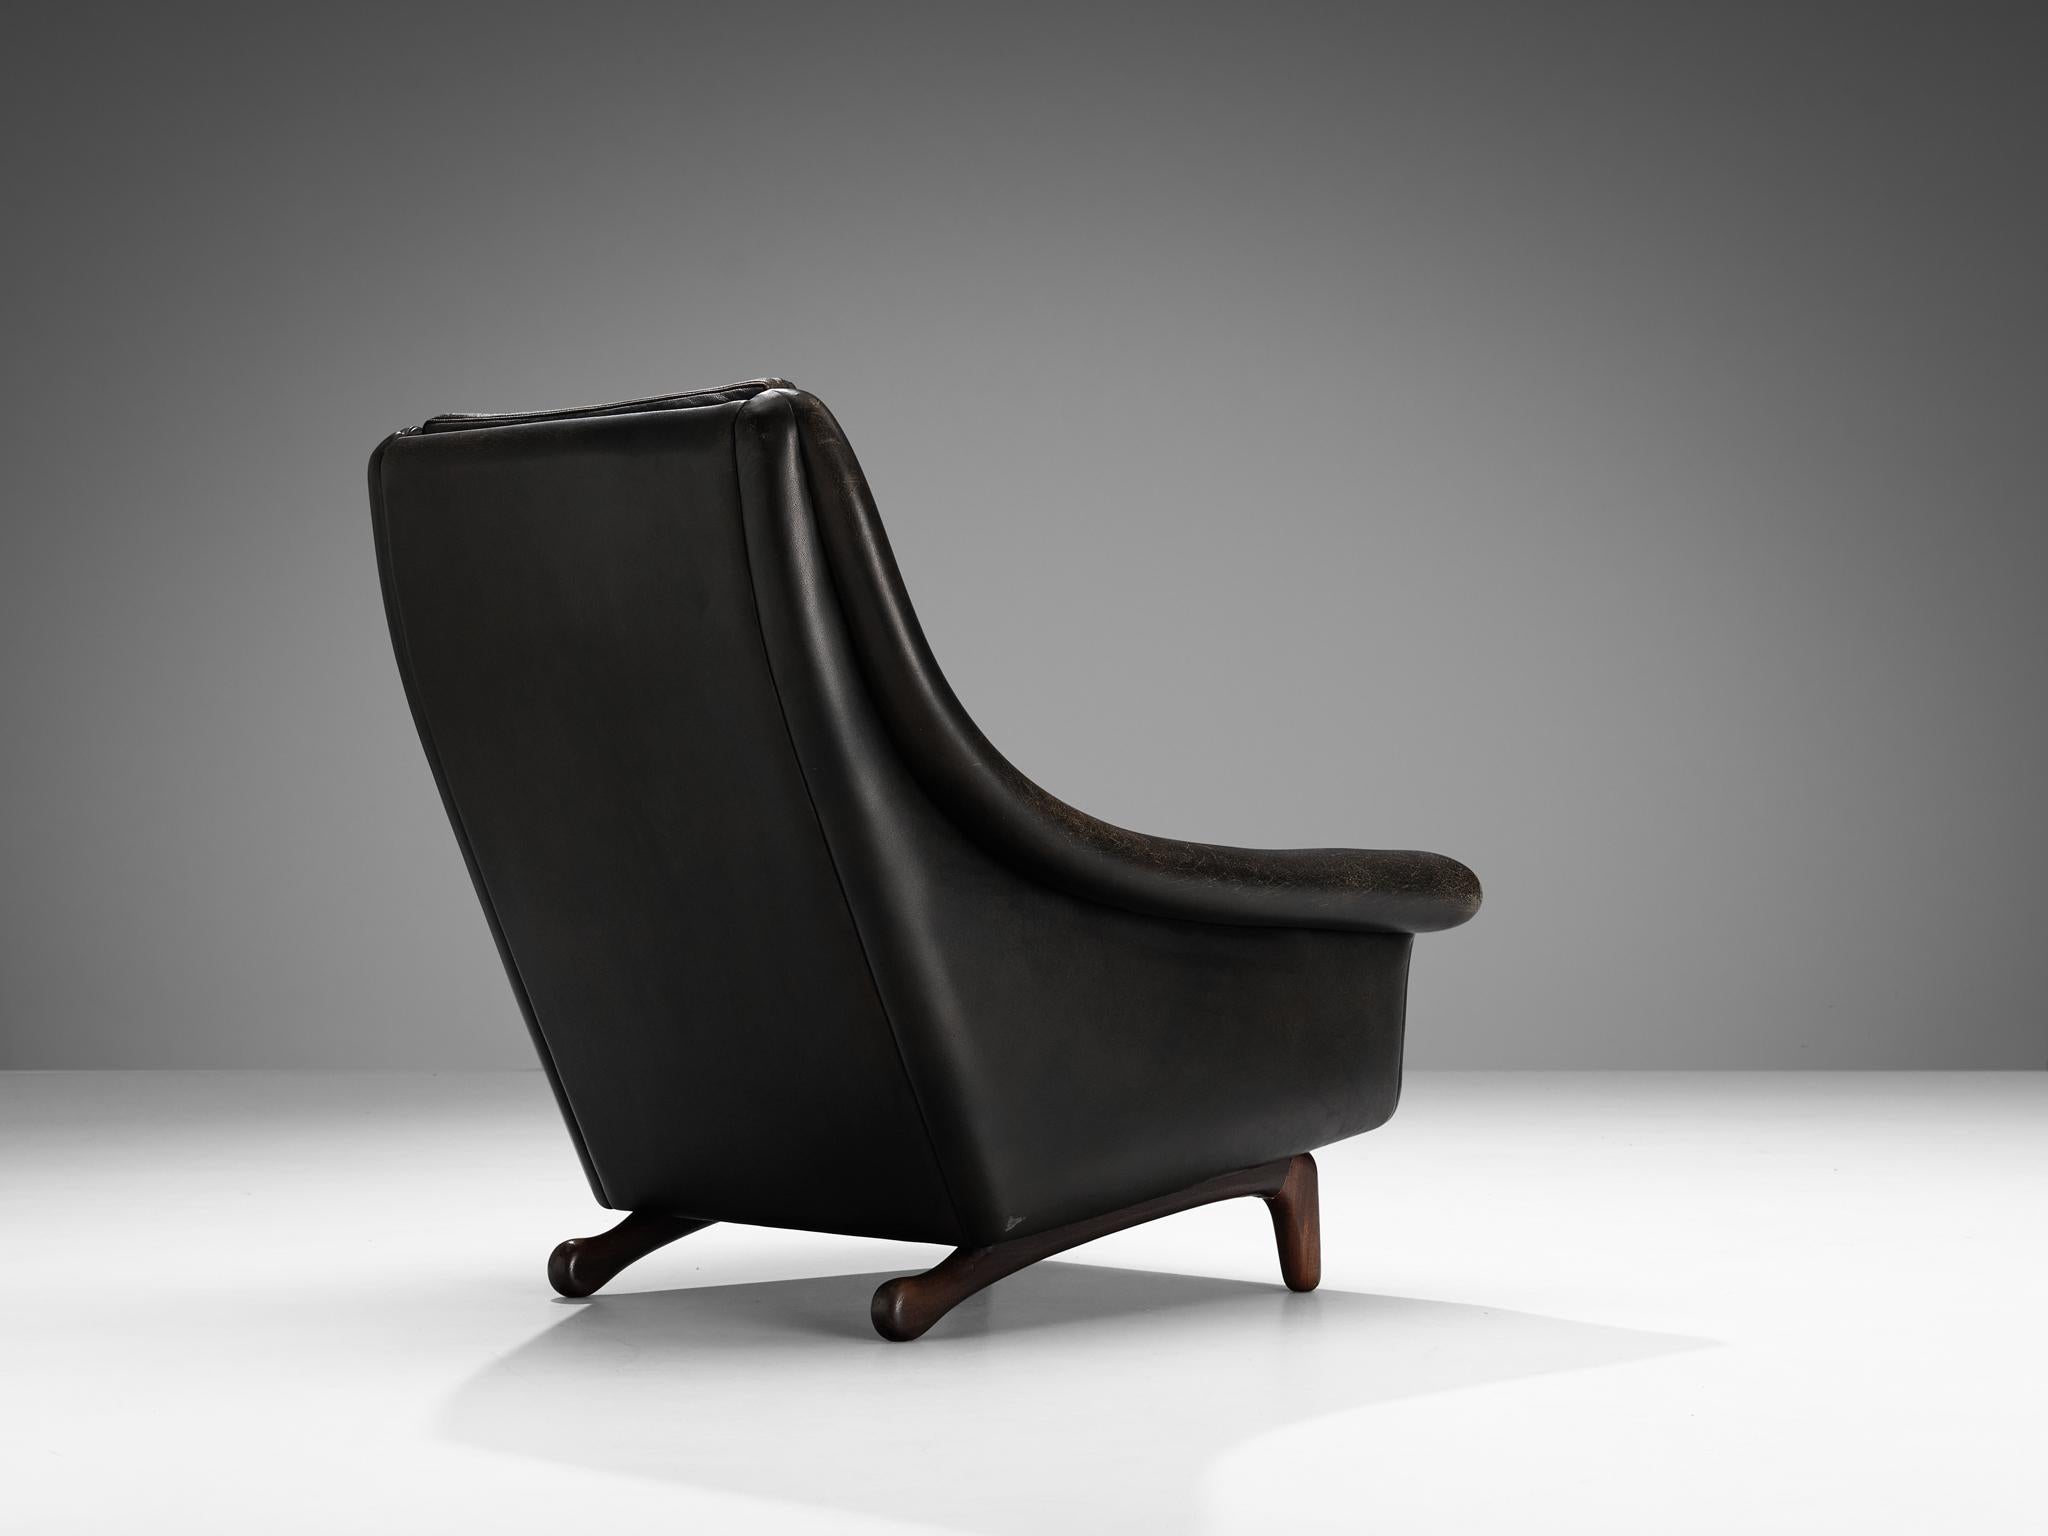 Easy chair, black leather, teak Denmark, 1960s.

This organically shaped armchair features a modest base that is sculptural and crafted in an exquisite manner. The legs form a great combination with the fluent curved shaped of the seat's shell.